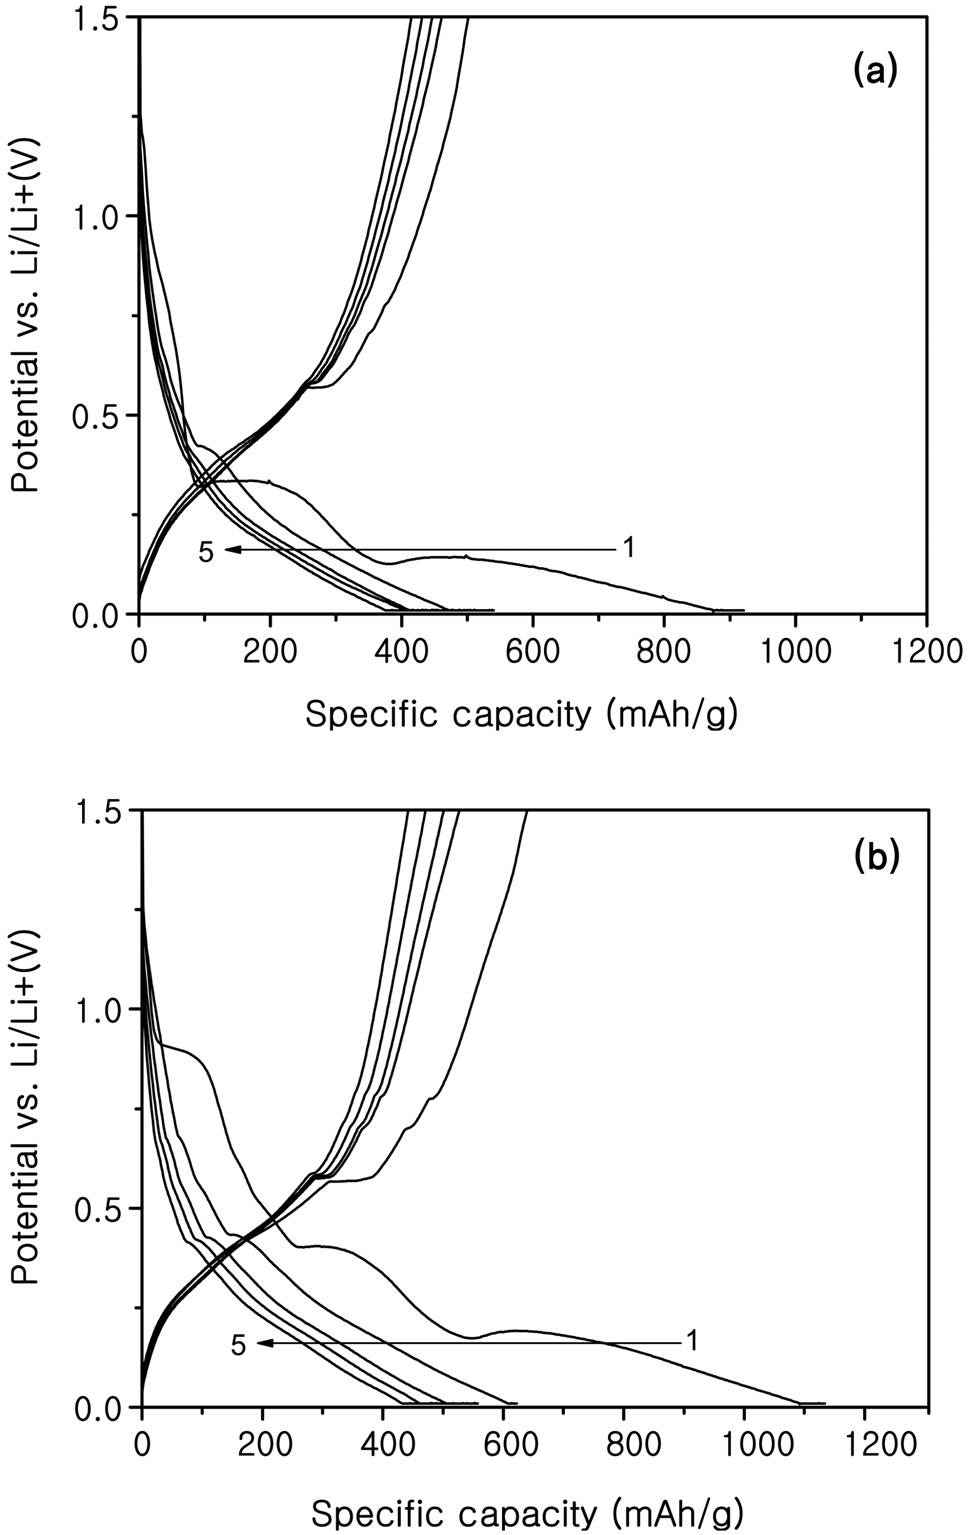 Charge-discharge curves of SnO2-SiO2 composite with carbon coating at different heating conditions; (a) 300 ℃ and (b) 900 ℃.